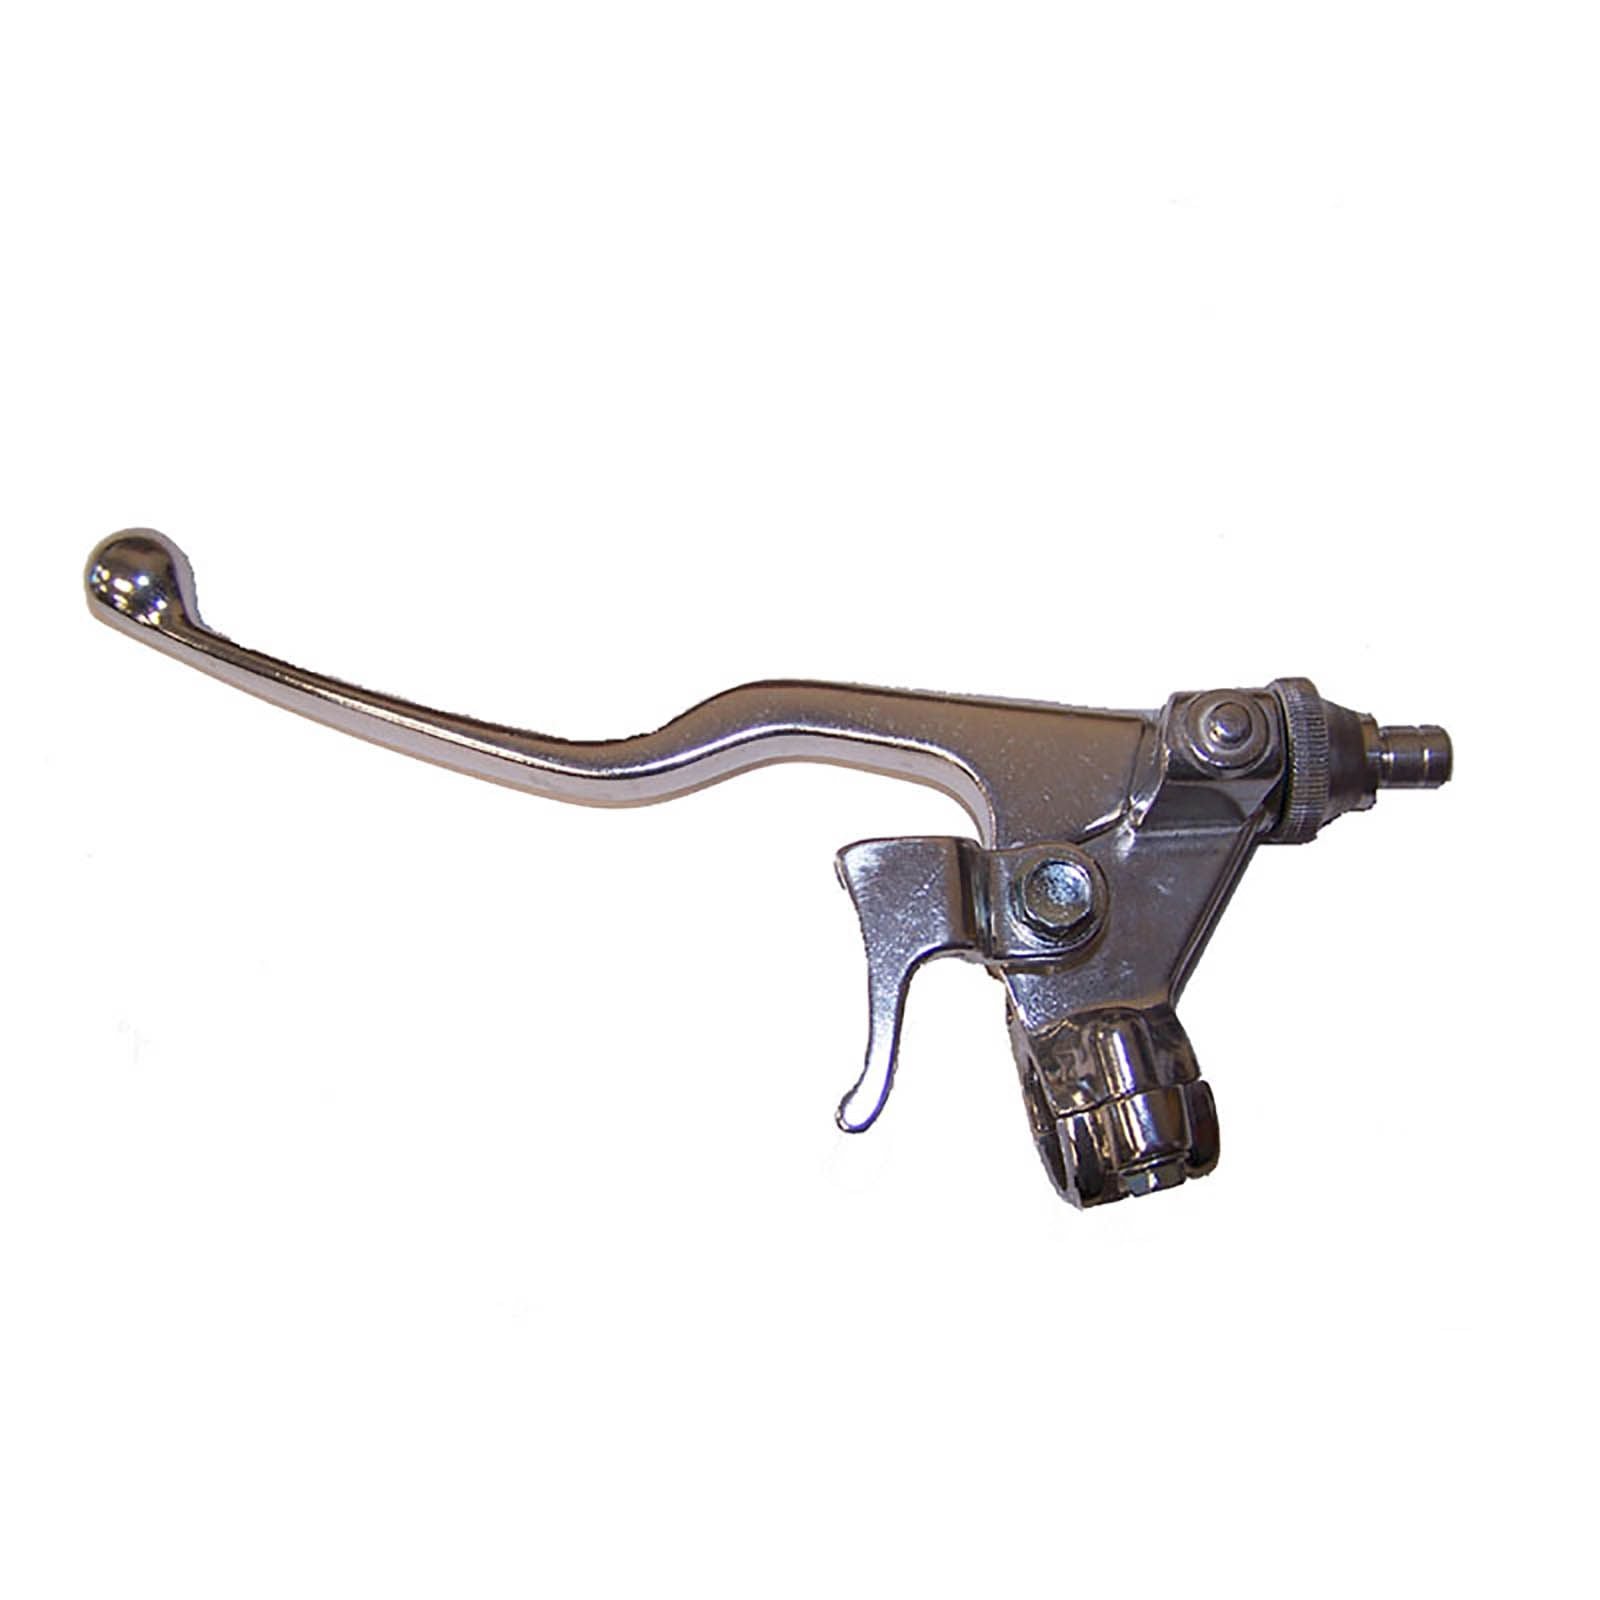 WHITES Clutch Lever Assemblie Q/Adjustable With Hot Start Lever #LAYKXF2005HS